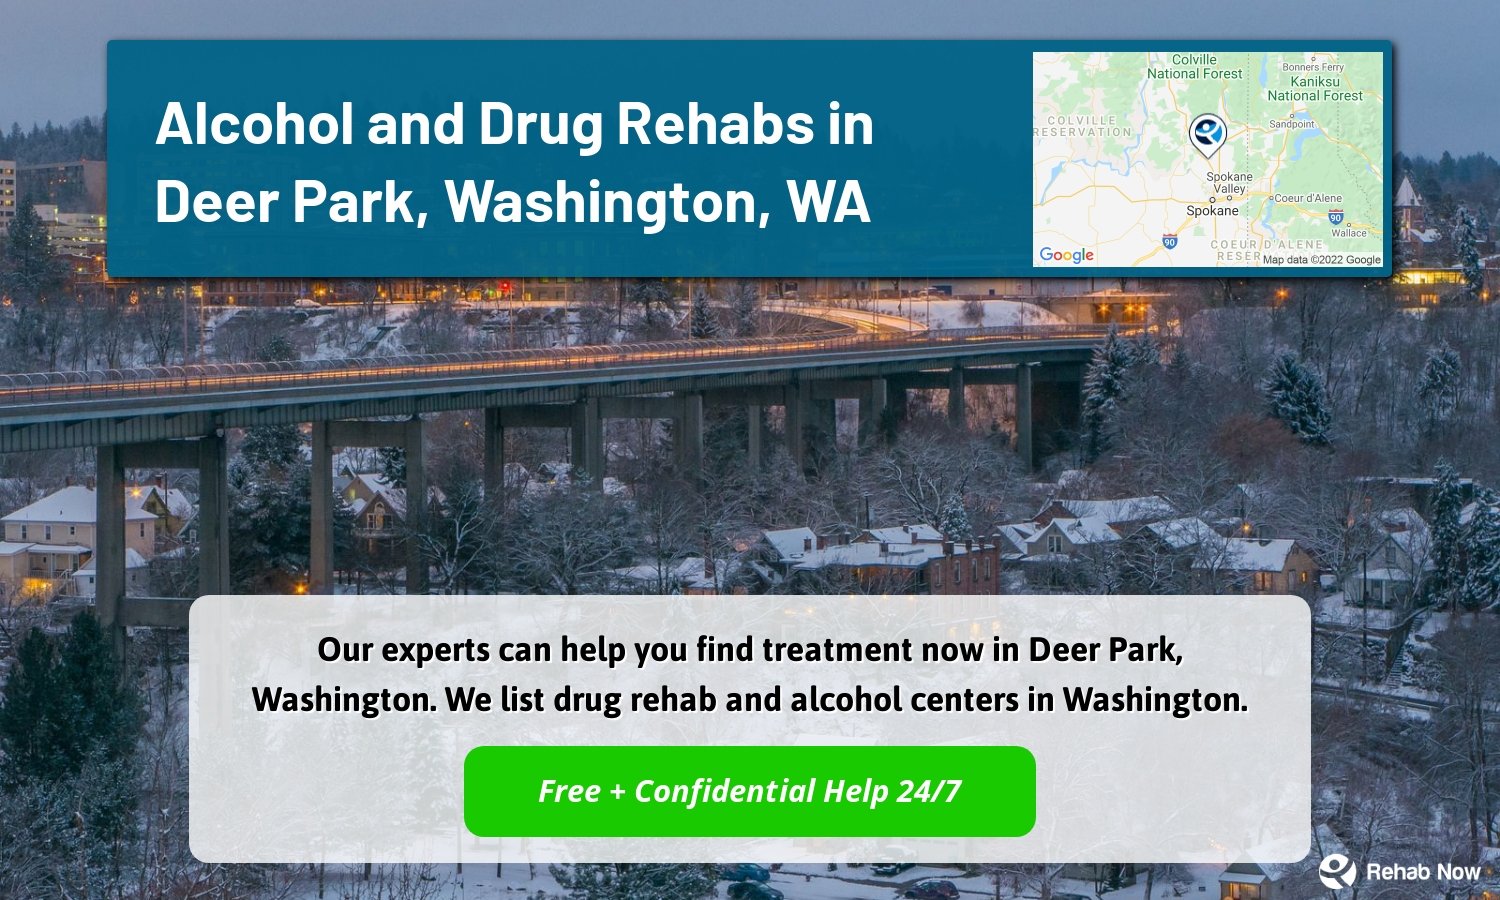 Our experts can help you find treatment now in Deer Park, Washington. We list drug rehab and alcohol centers in Washington.